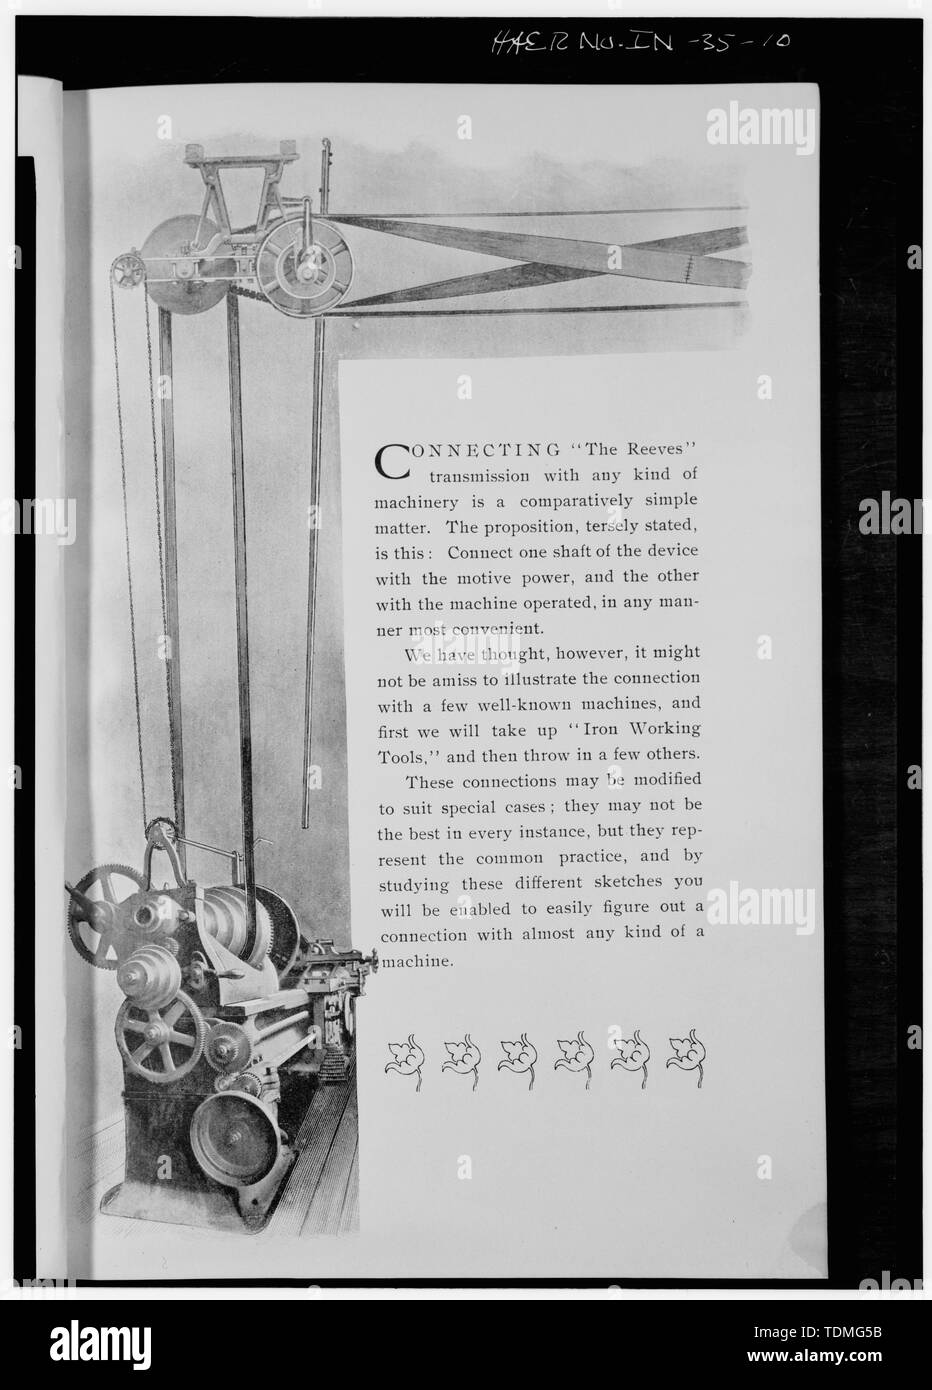 PHOTOCOPY OF TRADE ADVERTISING SHOWING THE REEVES OVERHEAD BELT TRANSMISSION POWER SYSTEM, CA. EARLY 1900S - Buckeye Manufacturing Company, Columbia Avenue, Anderson, Madison County, IN; Lambert Brothers Manufacturing Company; Lambert, John William; Boucher, Jack E; Sackheim, Donald; Rosenberg, Robert Stock Photo